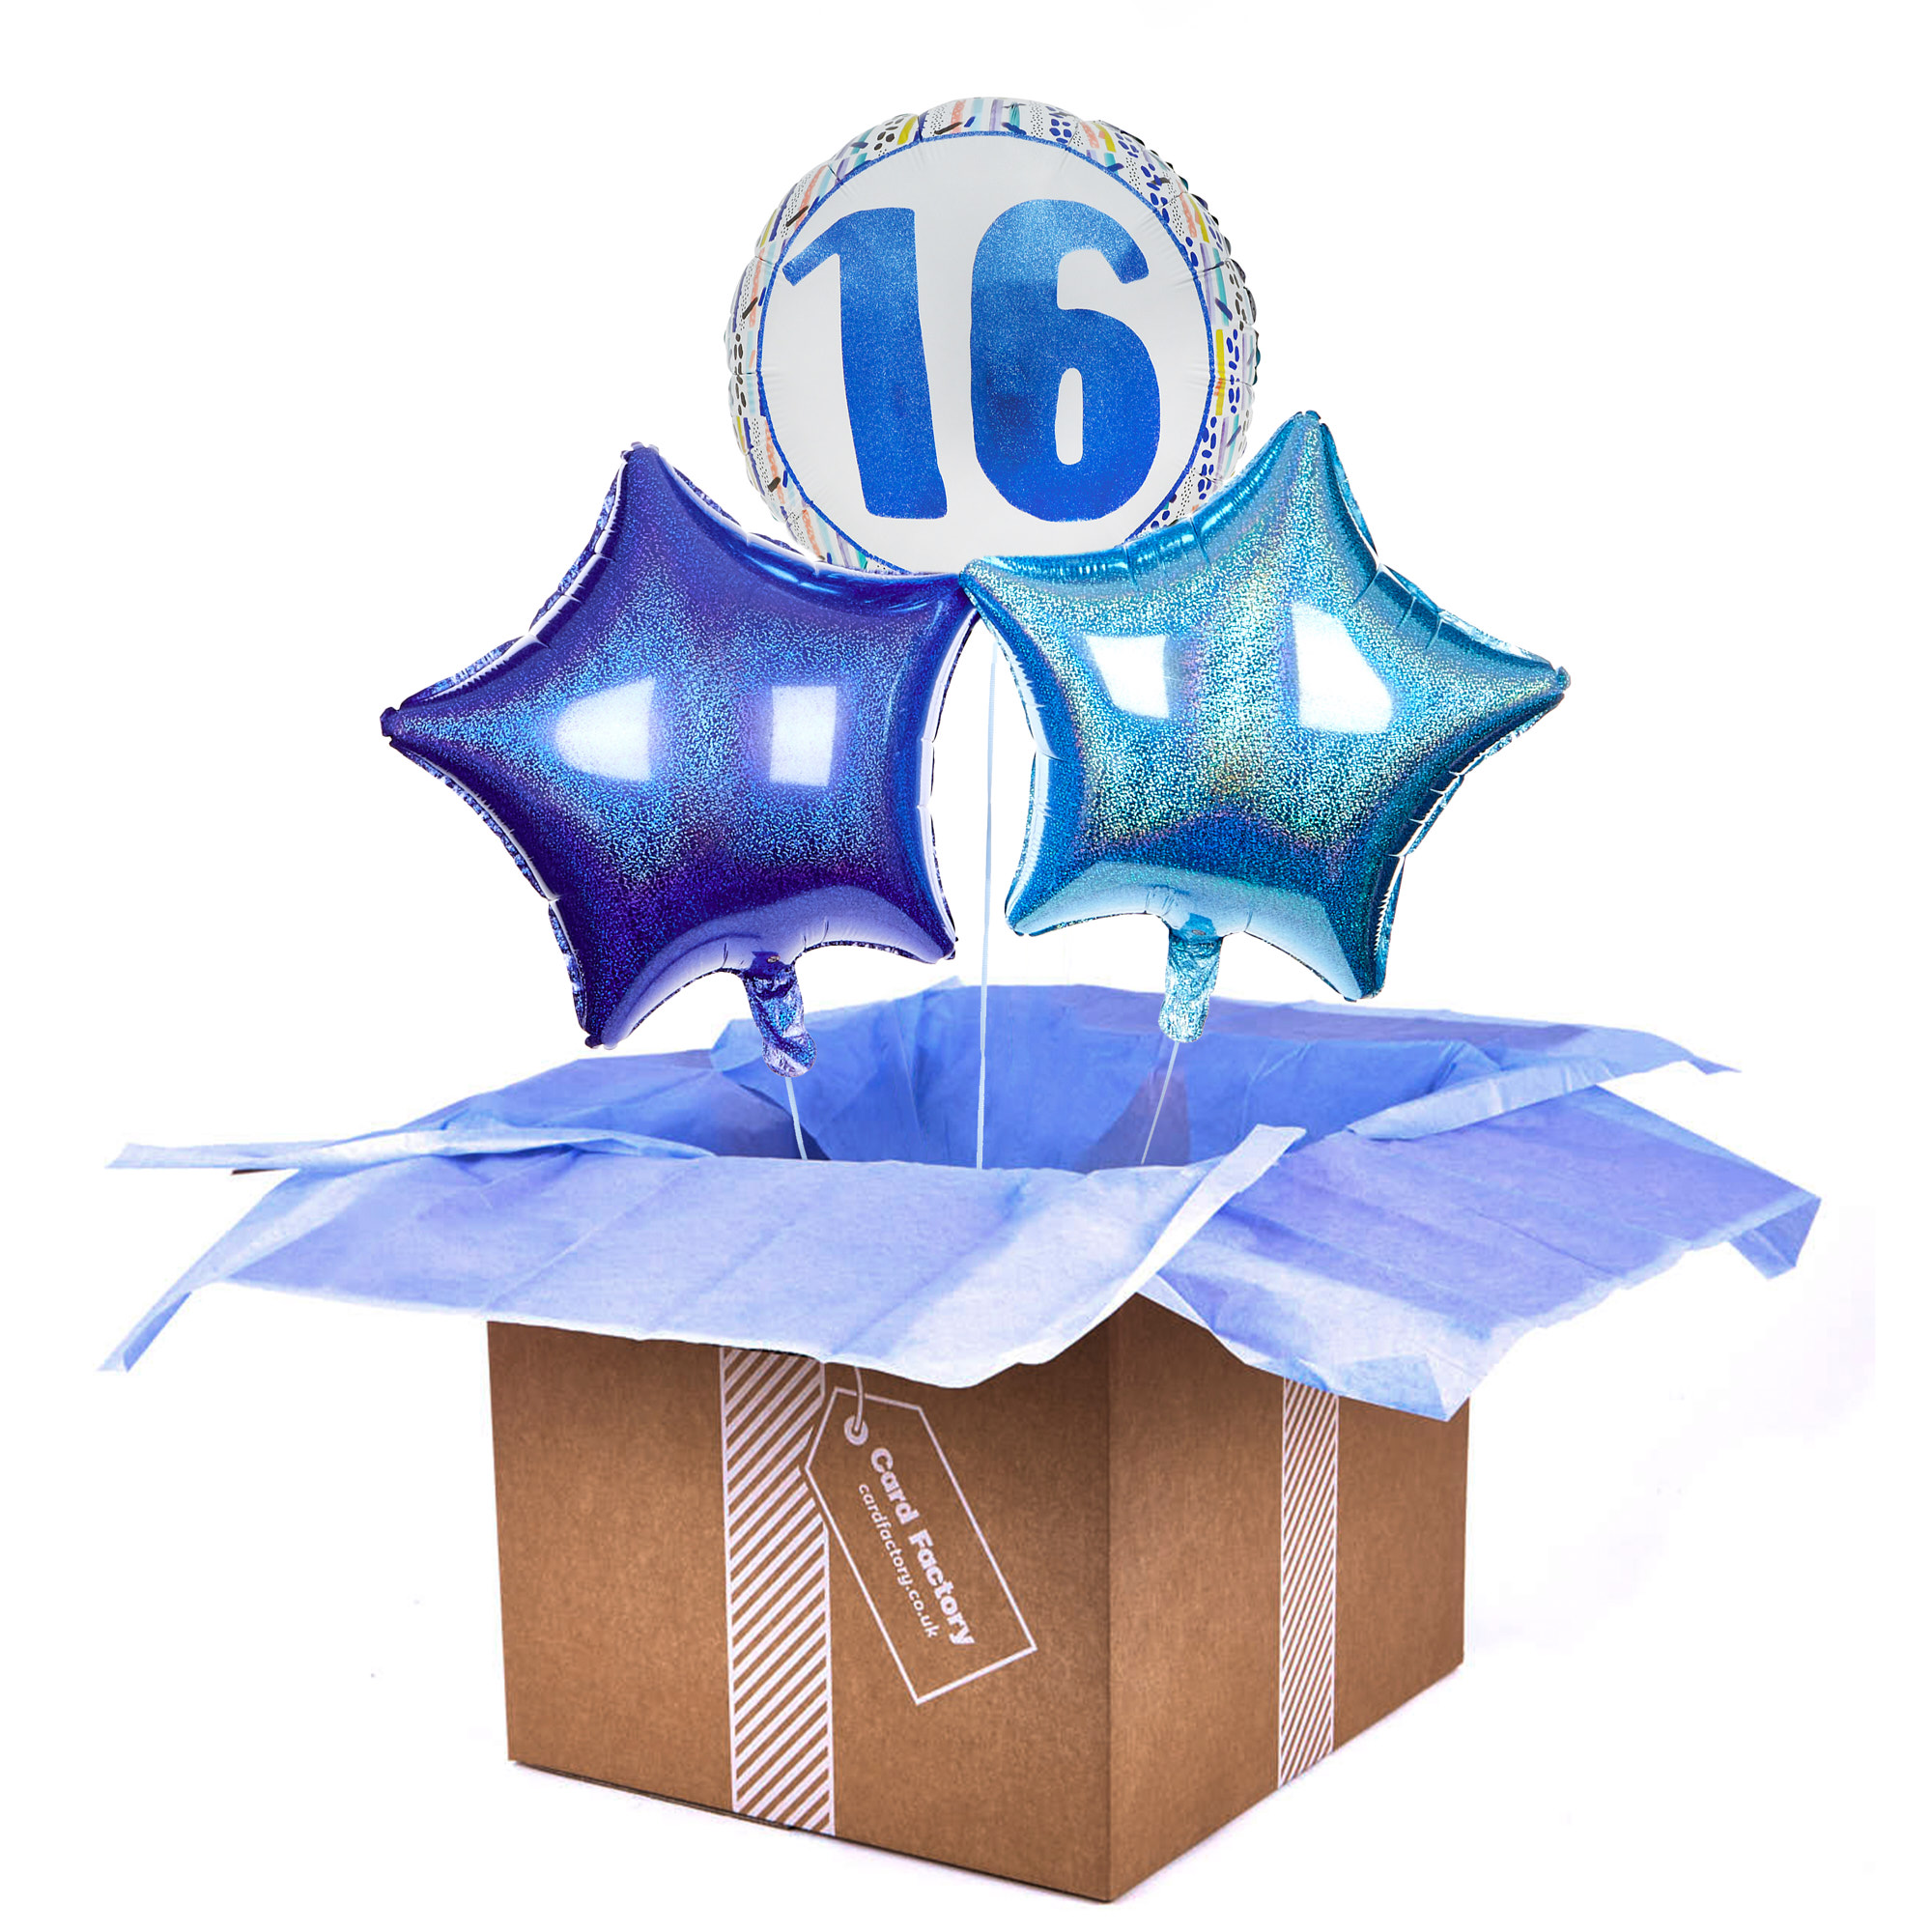 Blue Patterned 16th Birthday Balloon Bouquet - DELIVERED INFLATED!